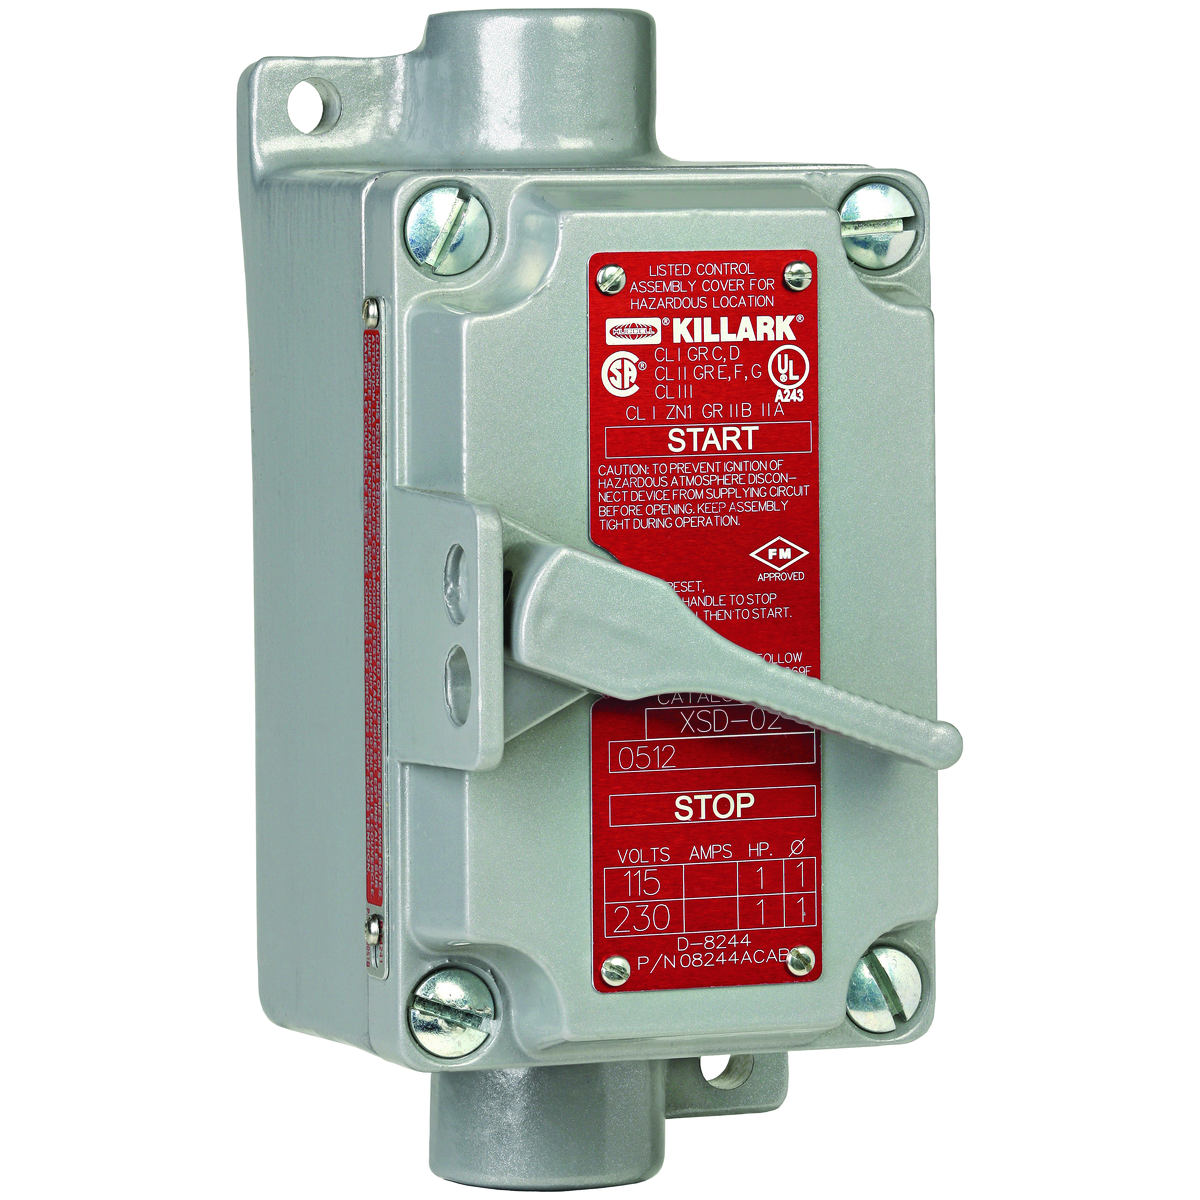 XSX SERIES - ALUMINUM DEAD-END SINGLE GANG 3-POLE, 3-PHASE MANUAL MOTORSTARTING SWITCH UNIT - WITHOUT OVERLOAD PROTECTION - HUB SIZE 3/4 INCH